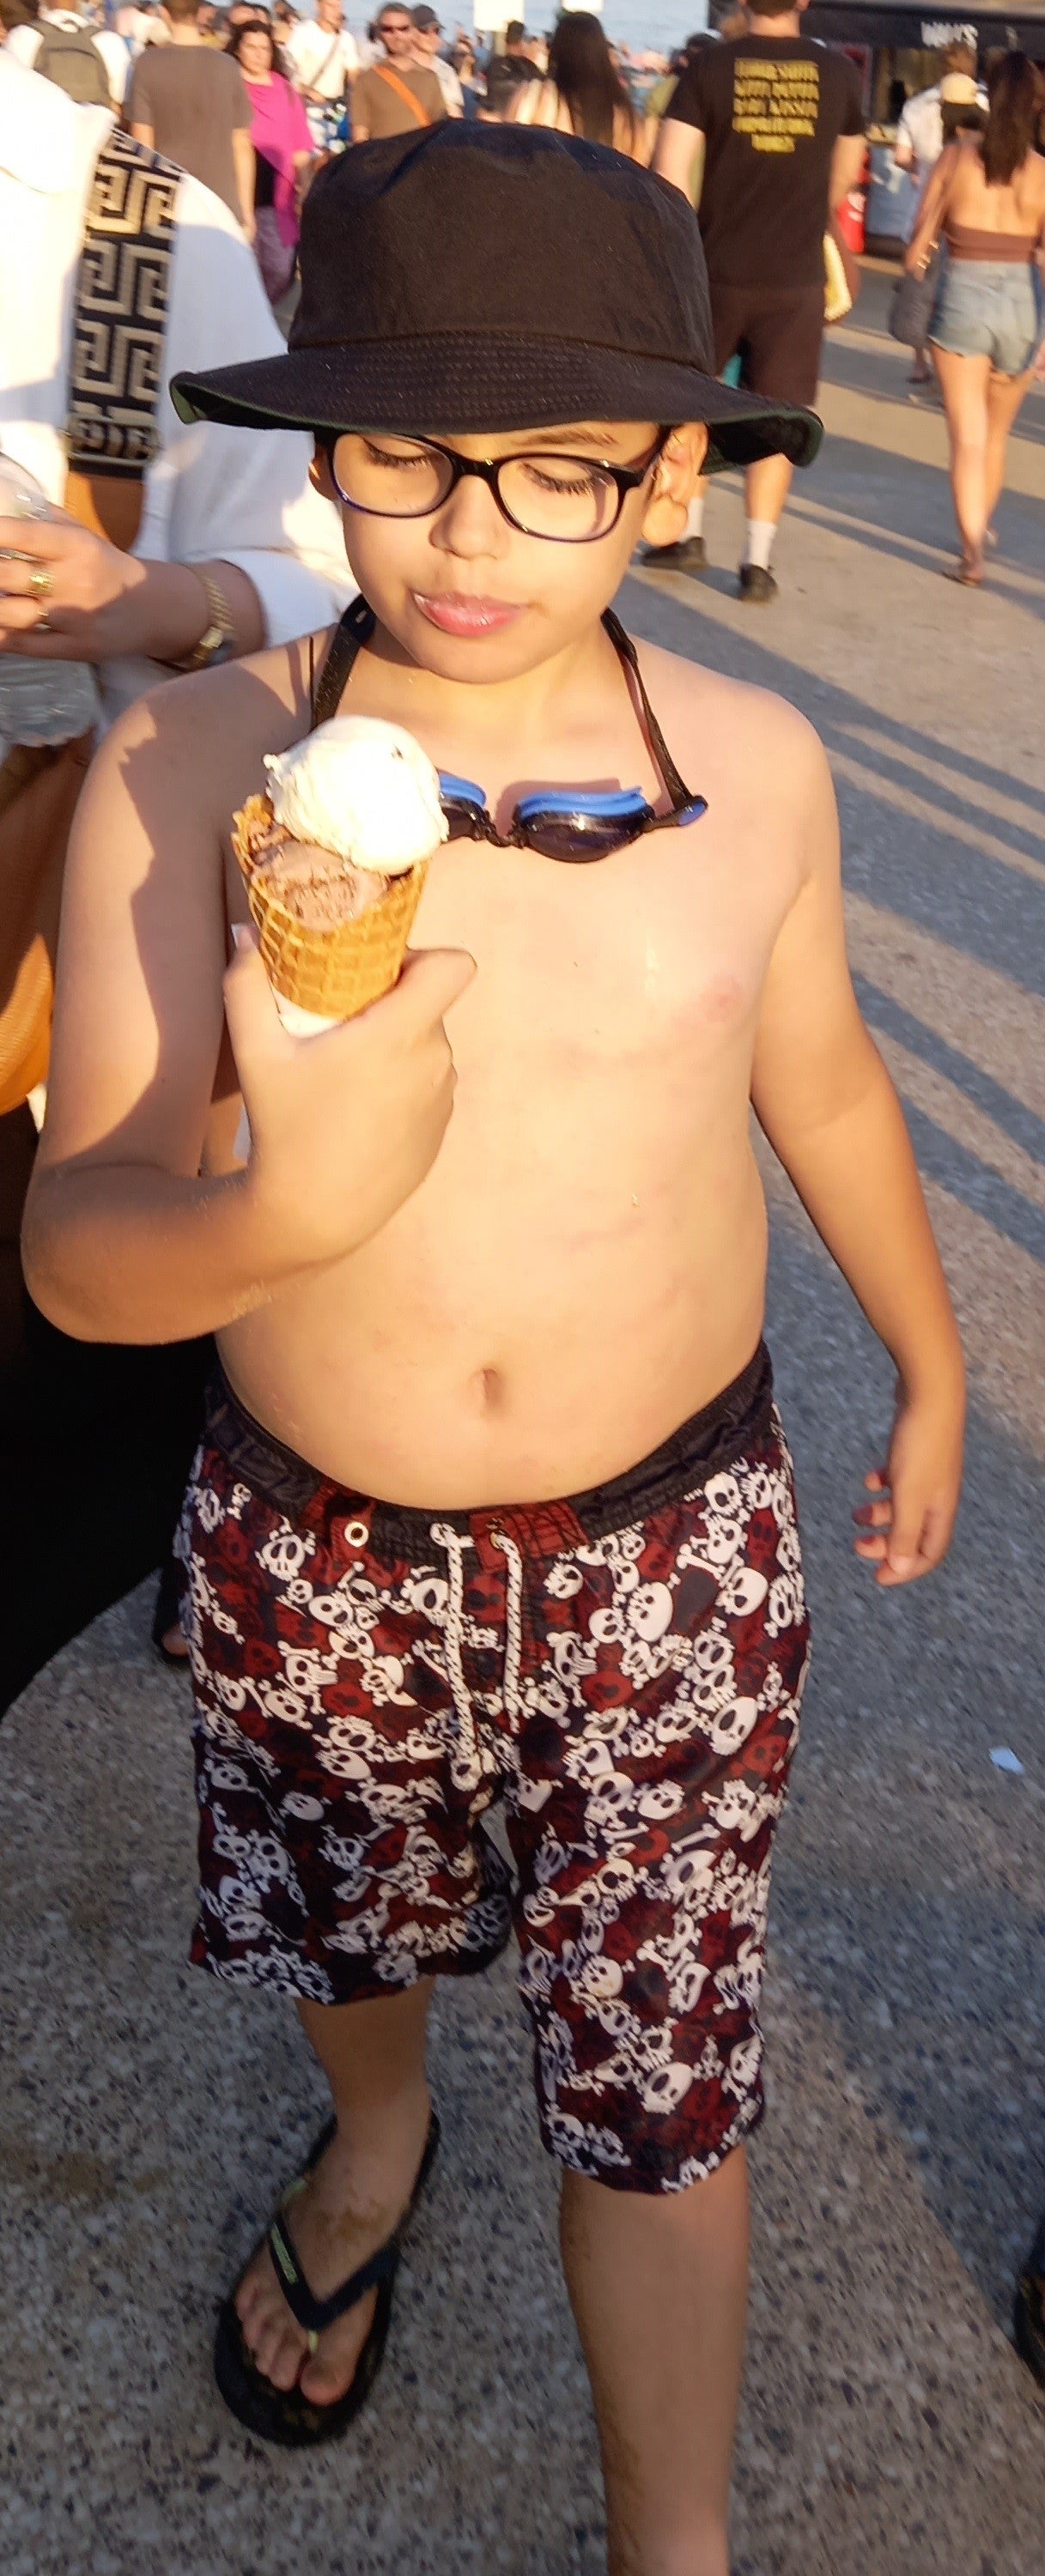 Massien Belguesmia, nine, has gone missing from Bournemouth beach (Dorset Police/PA)